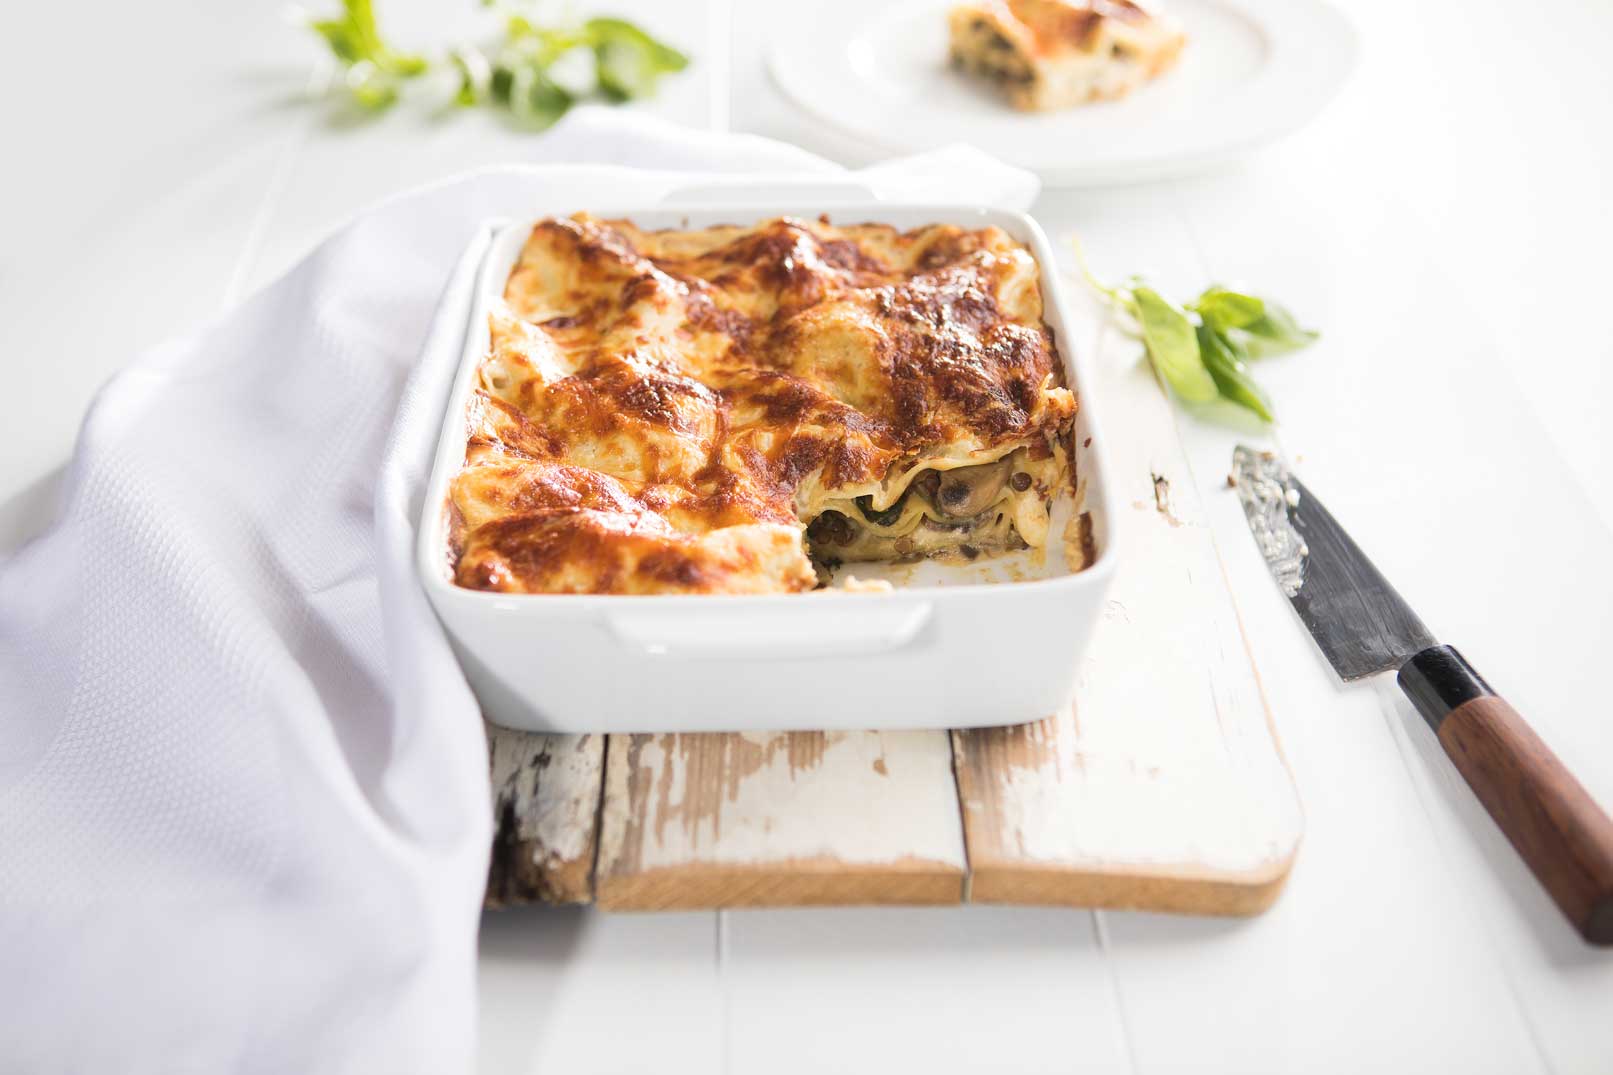 Image of mushroom, spinach and lentil lasagne in a white ceramic dish on a wooden chopping board with basil on the side, a white cloth napkin and a serving knife